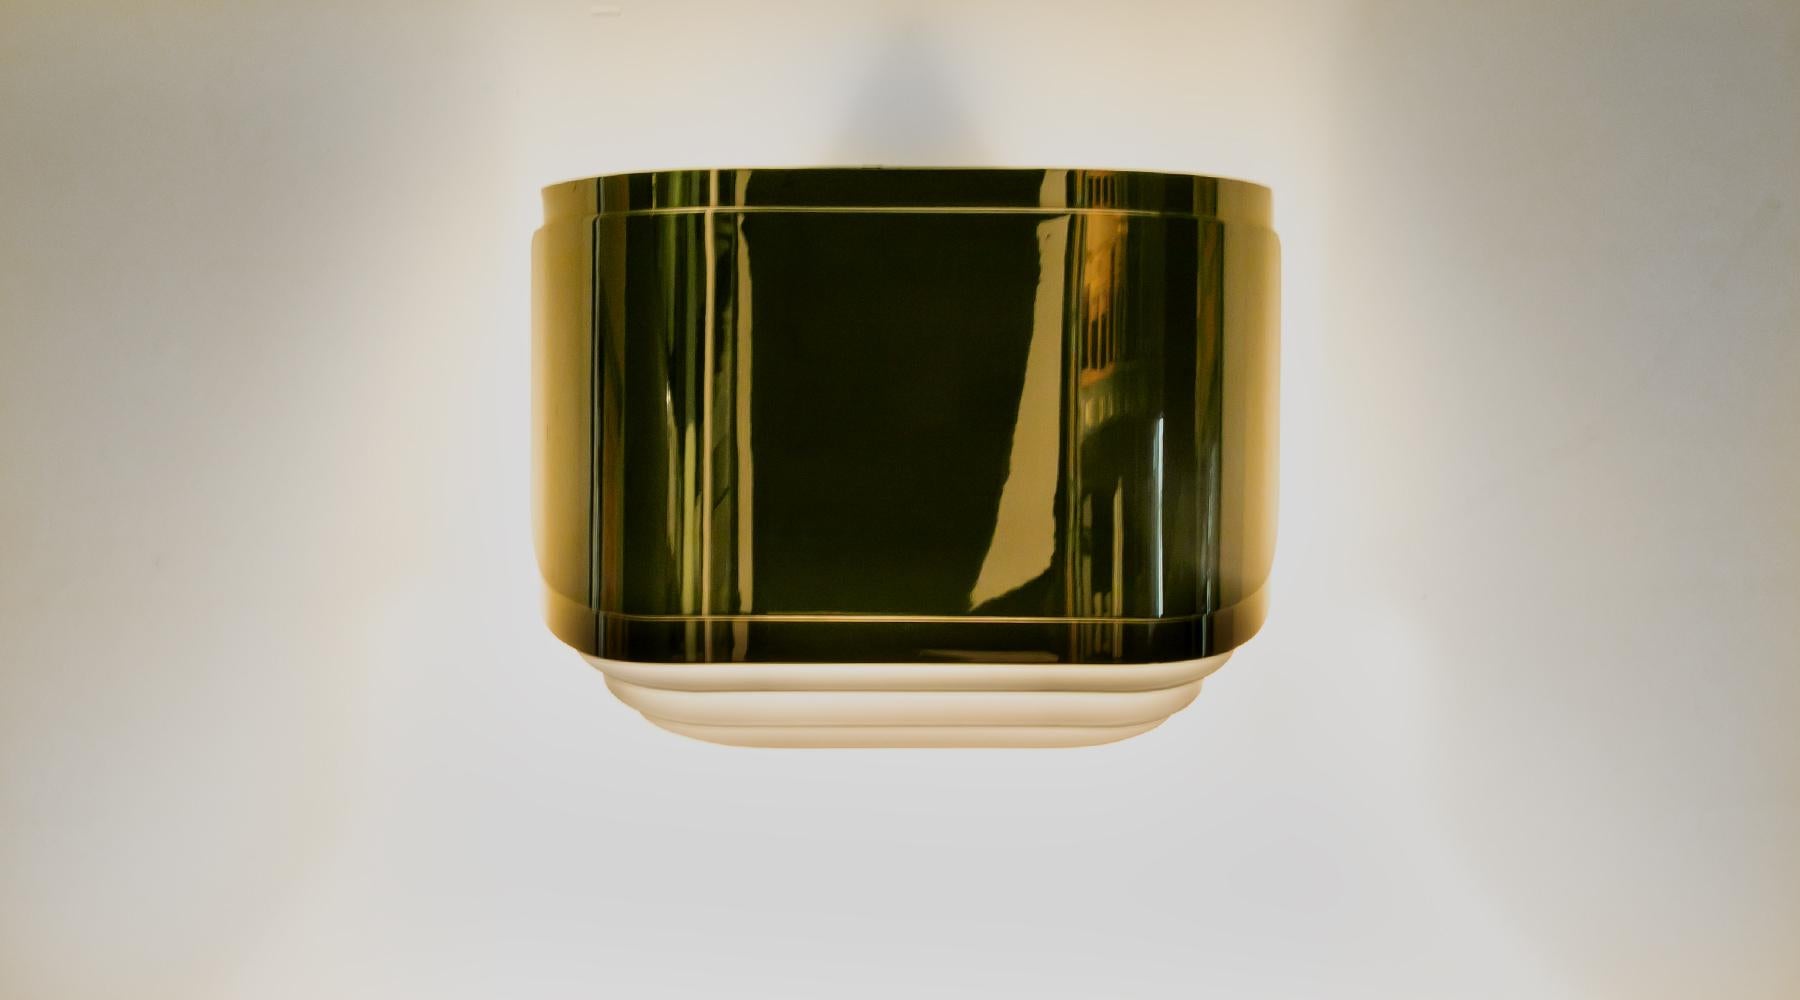 Polished brass, American wall light designed by Warren Platner, USA, 1981.

Elegant brass wall-mounted lamp designed and manufactured Warren Platner in USA in 1981. The lamp gives a beautiful light and shadow play on the wall when lighted. Brass